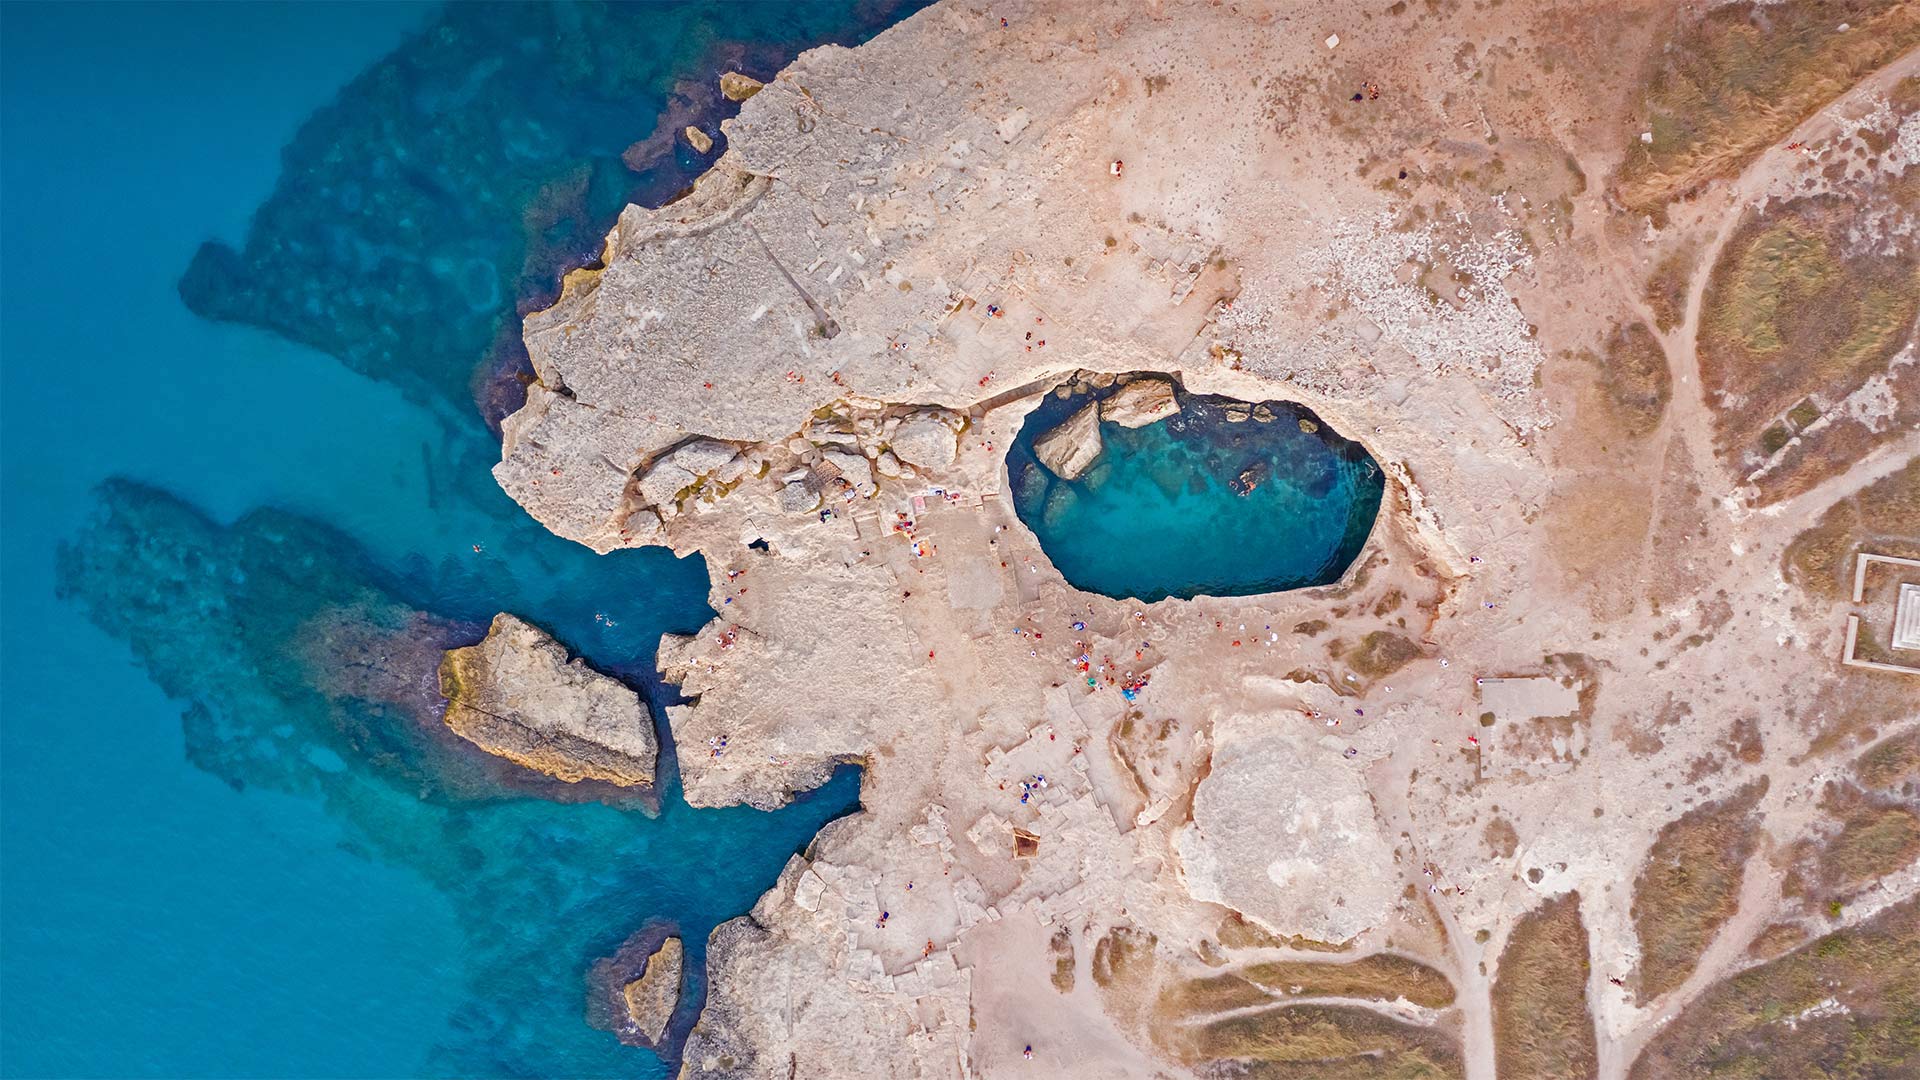 Aerial view of the Grotta della Poesia (Poetry's Cave) near Roca, Lecce, Italy - Amazing Aerial Agency/Offset by Shutterstock)